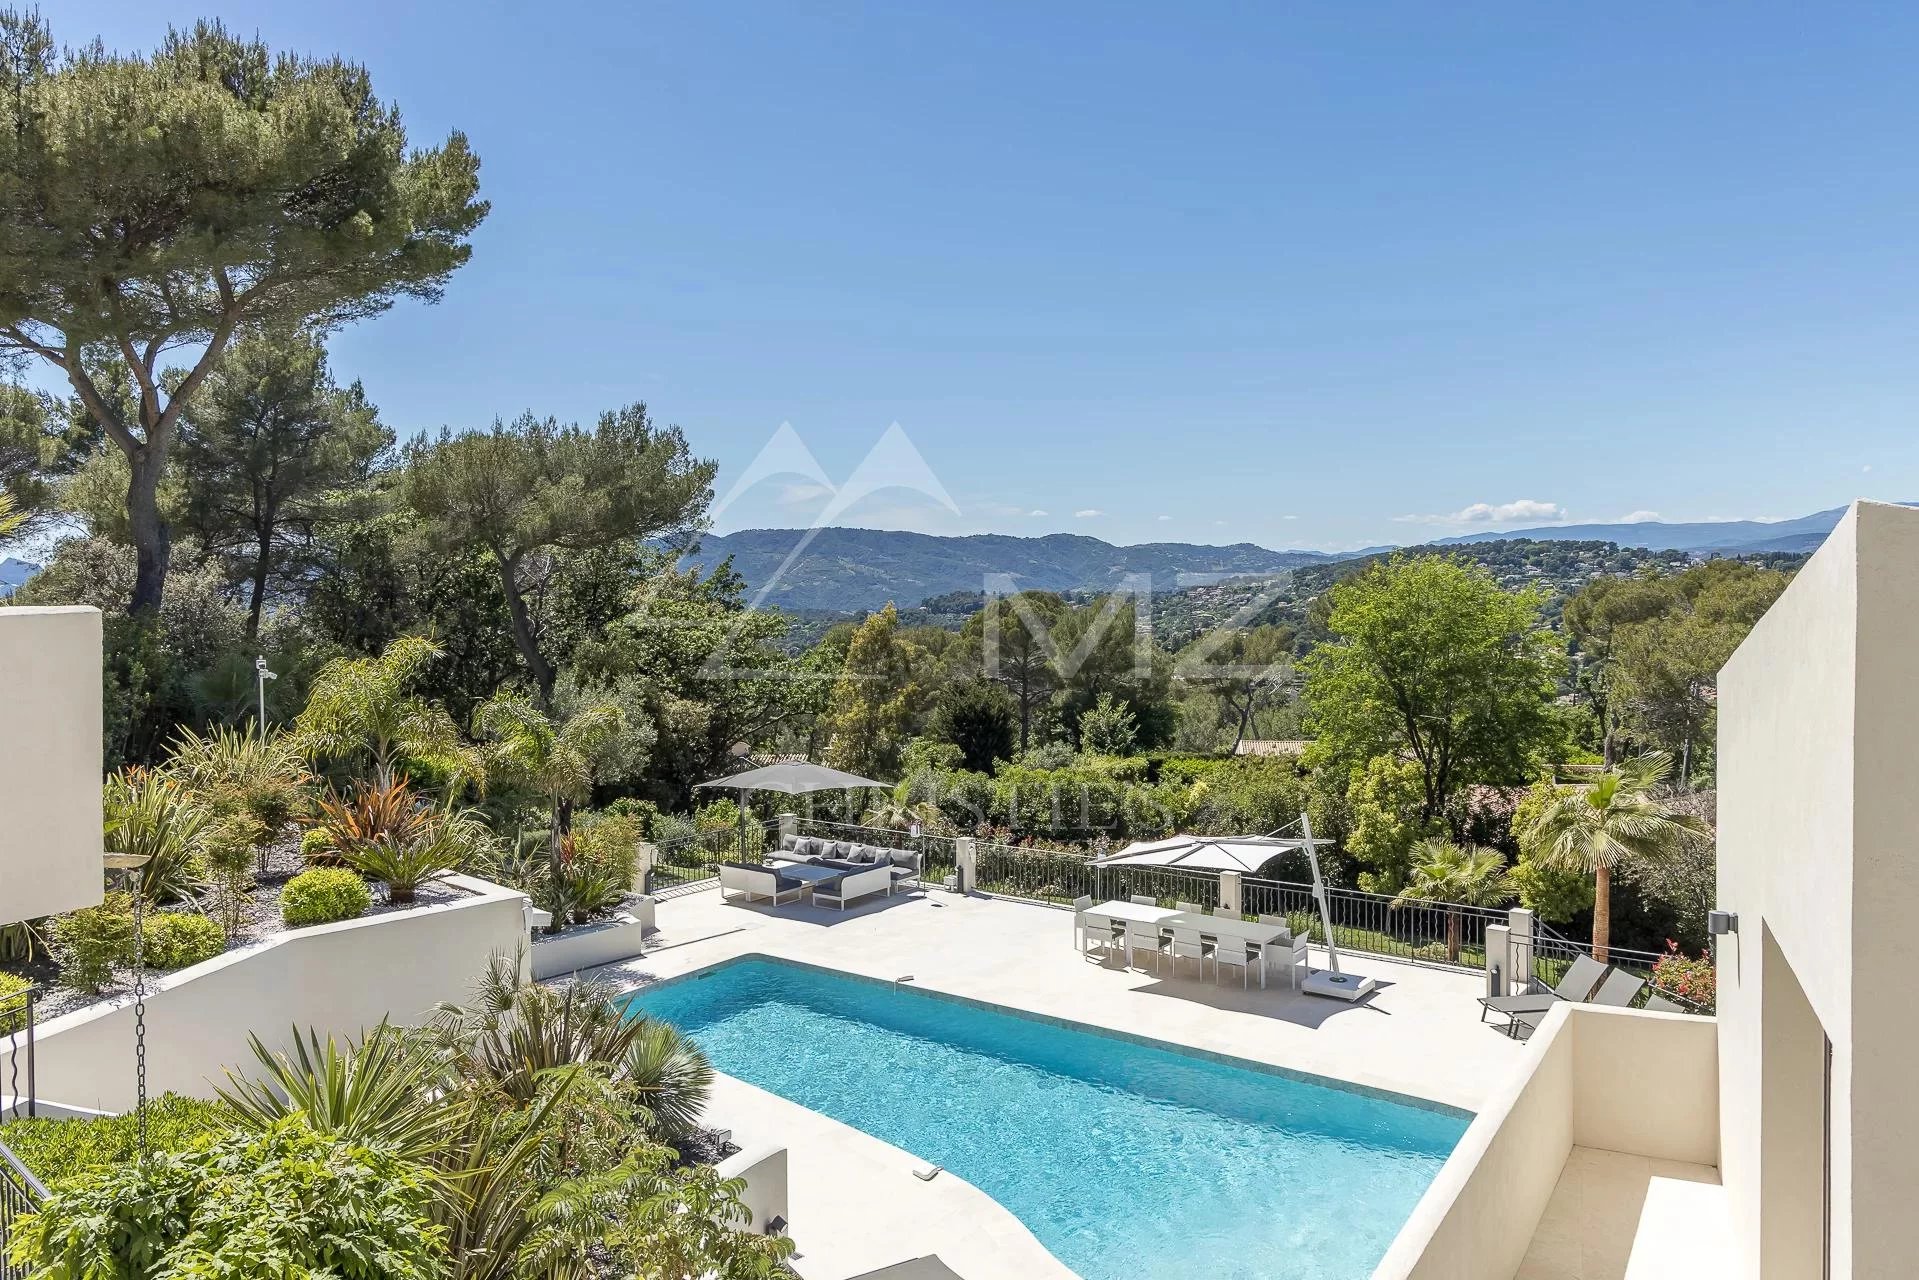 MOUGINS RESIDENTIAL AREA - VILLAGE AND HILLS VIEWS